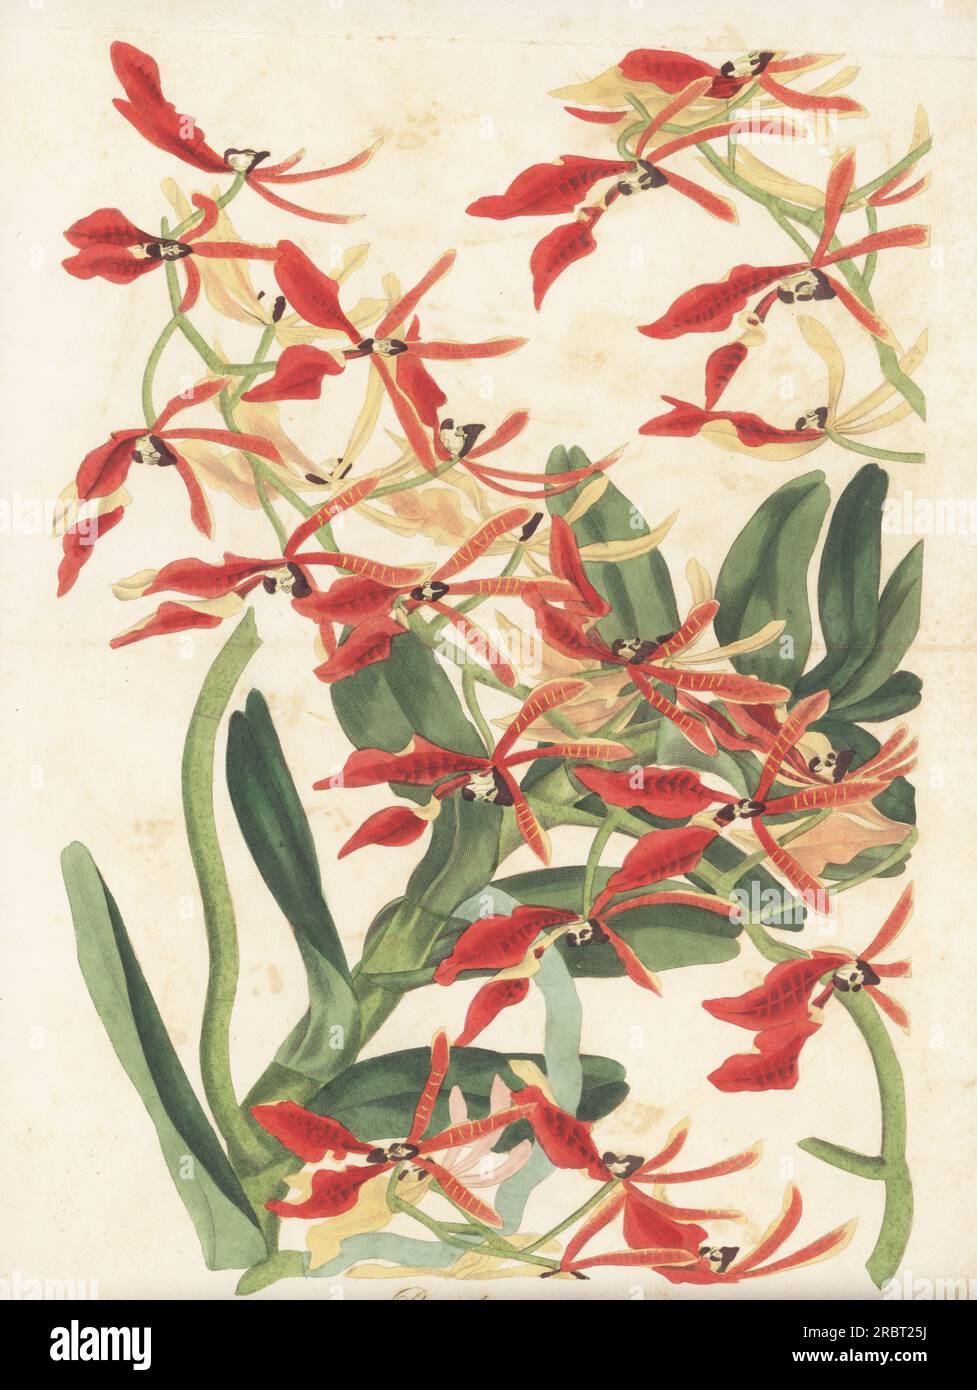 Renanthera coccinea orchid. Chinese scarlet-flowered air plant, Renanthera coccinea. Native from China to Indochina, found growing on trees in the woods in Cochin China. Handcoloured engraving by Frederick William Smith after a botanical illustration by Samuel Holden from Joseph Paxton’s Magazine of Botany, and Register of Flowering Plants, Volume 4, Orr and Smith, London, 1837. Stock Photo